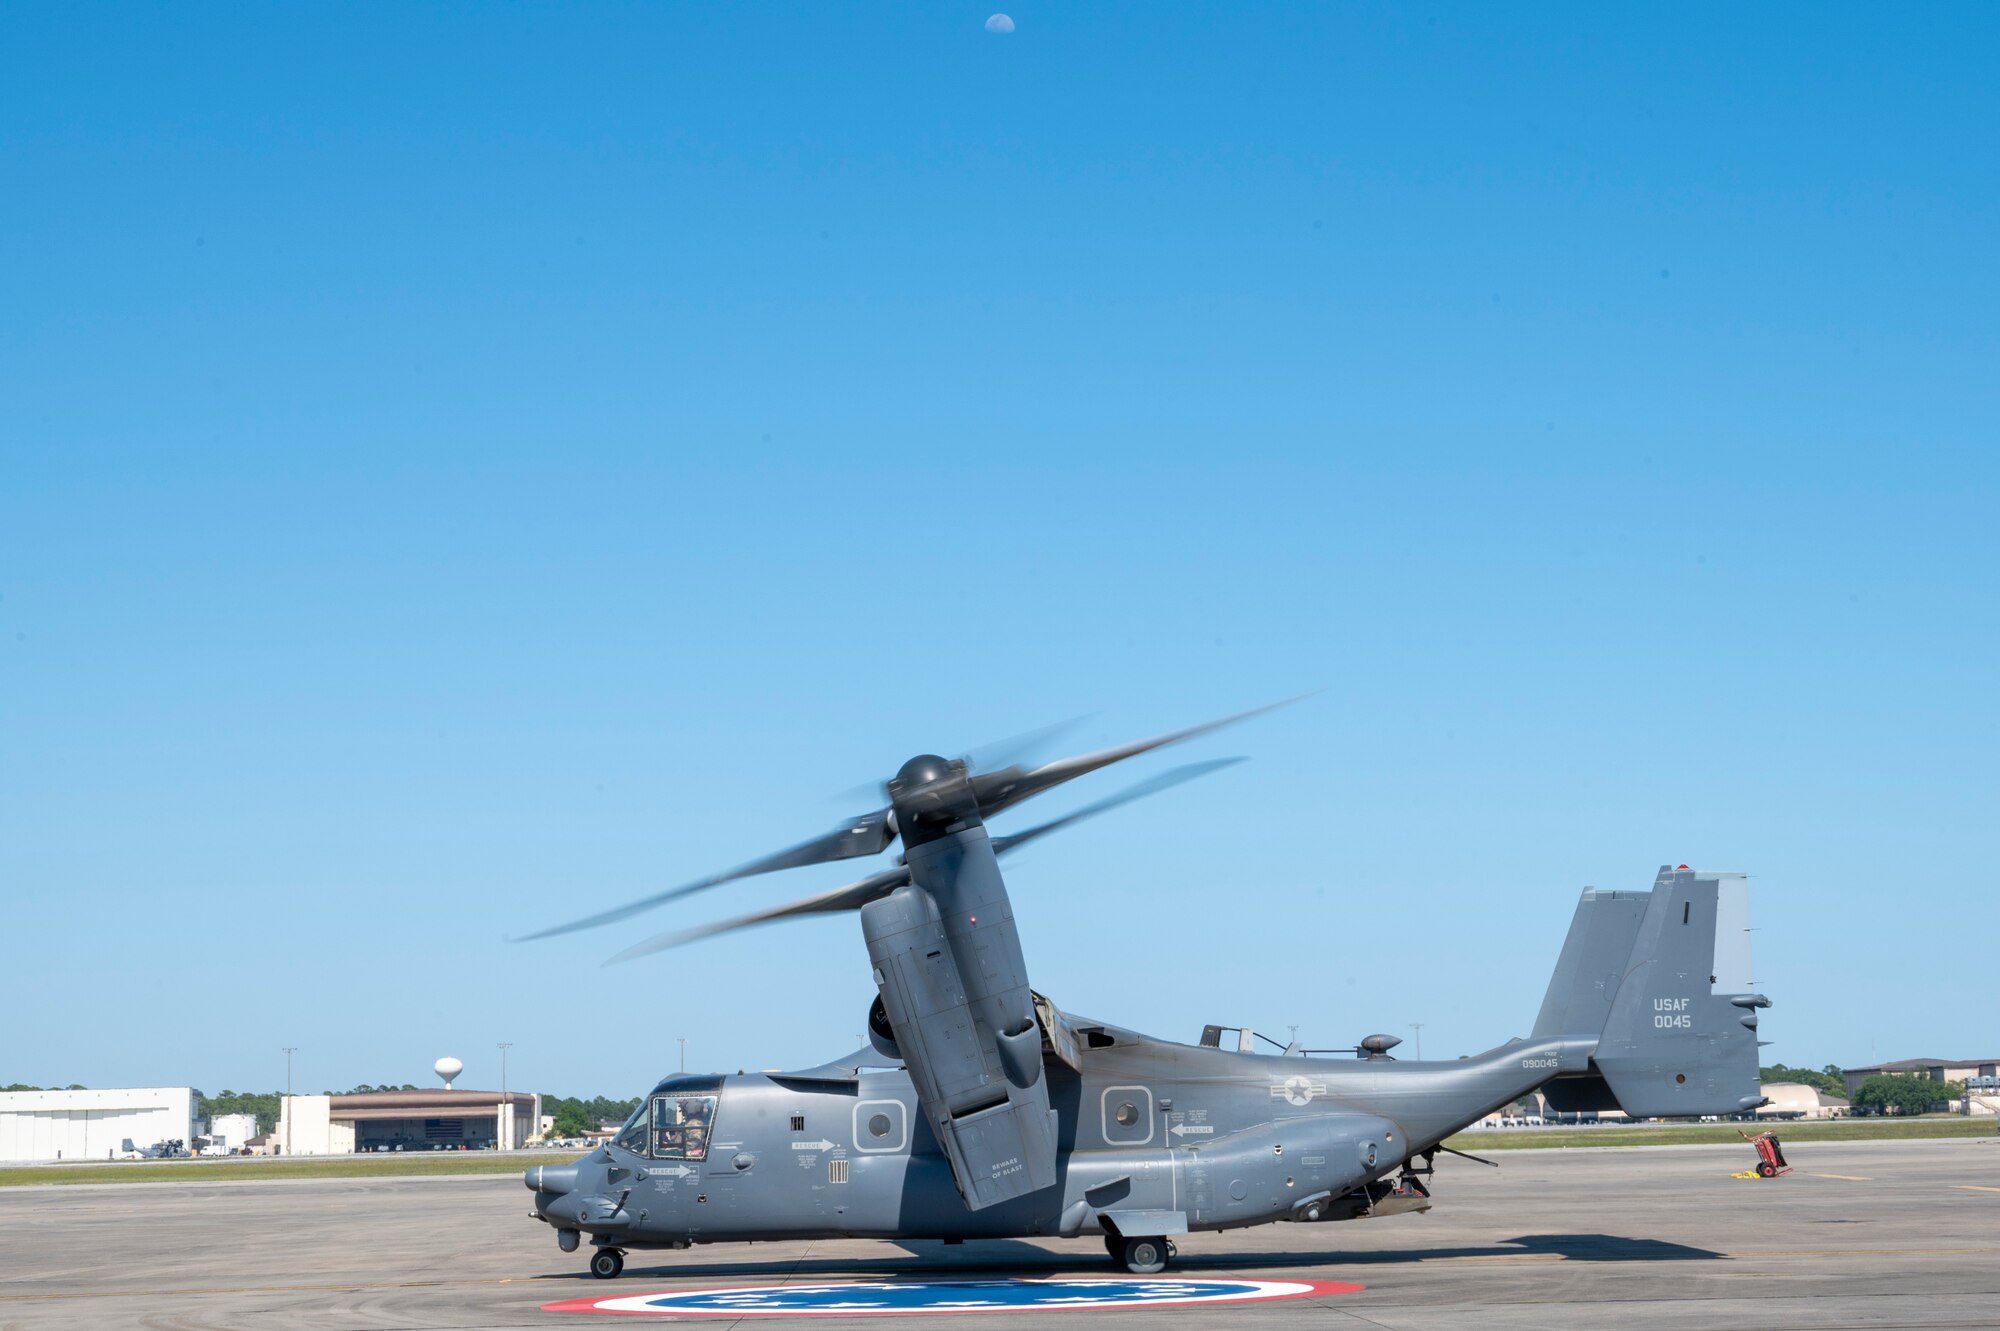 U.S. Air Force Lt. Gen. Brad Webb, commander of Air Education and Training Command, takes off from flight line in a CV-22 Osprey assigned to the 8th Special Operations Squadron, May 10, 2022, at Hurlburt Field, Fla.